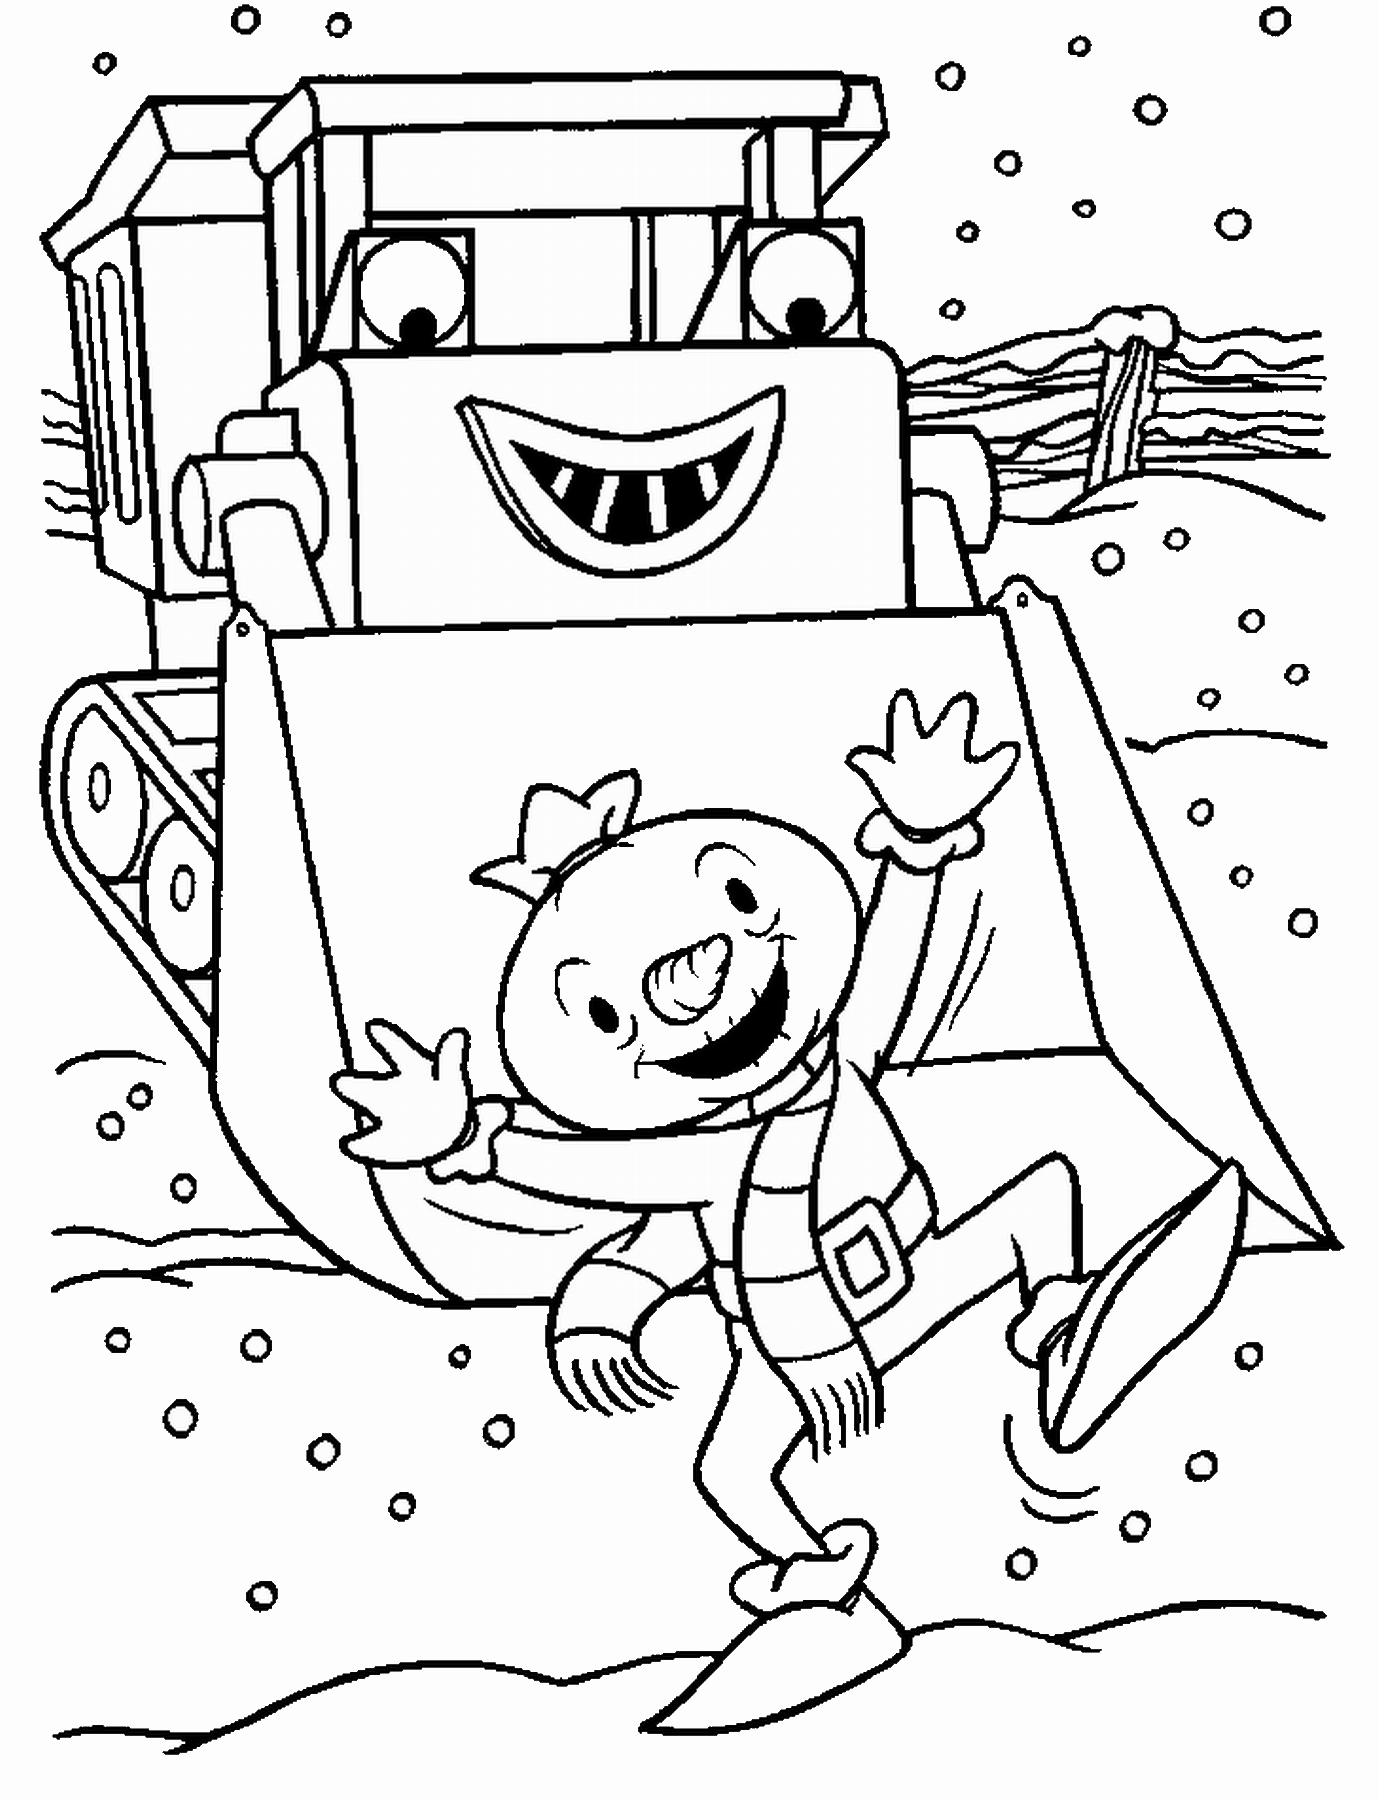 Bob the Builder Coloring Pages TV Film bob the builder_34 Printable 2020 00984 Coloring4free